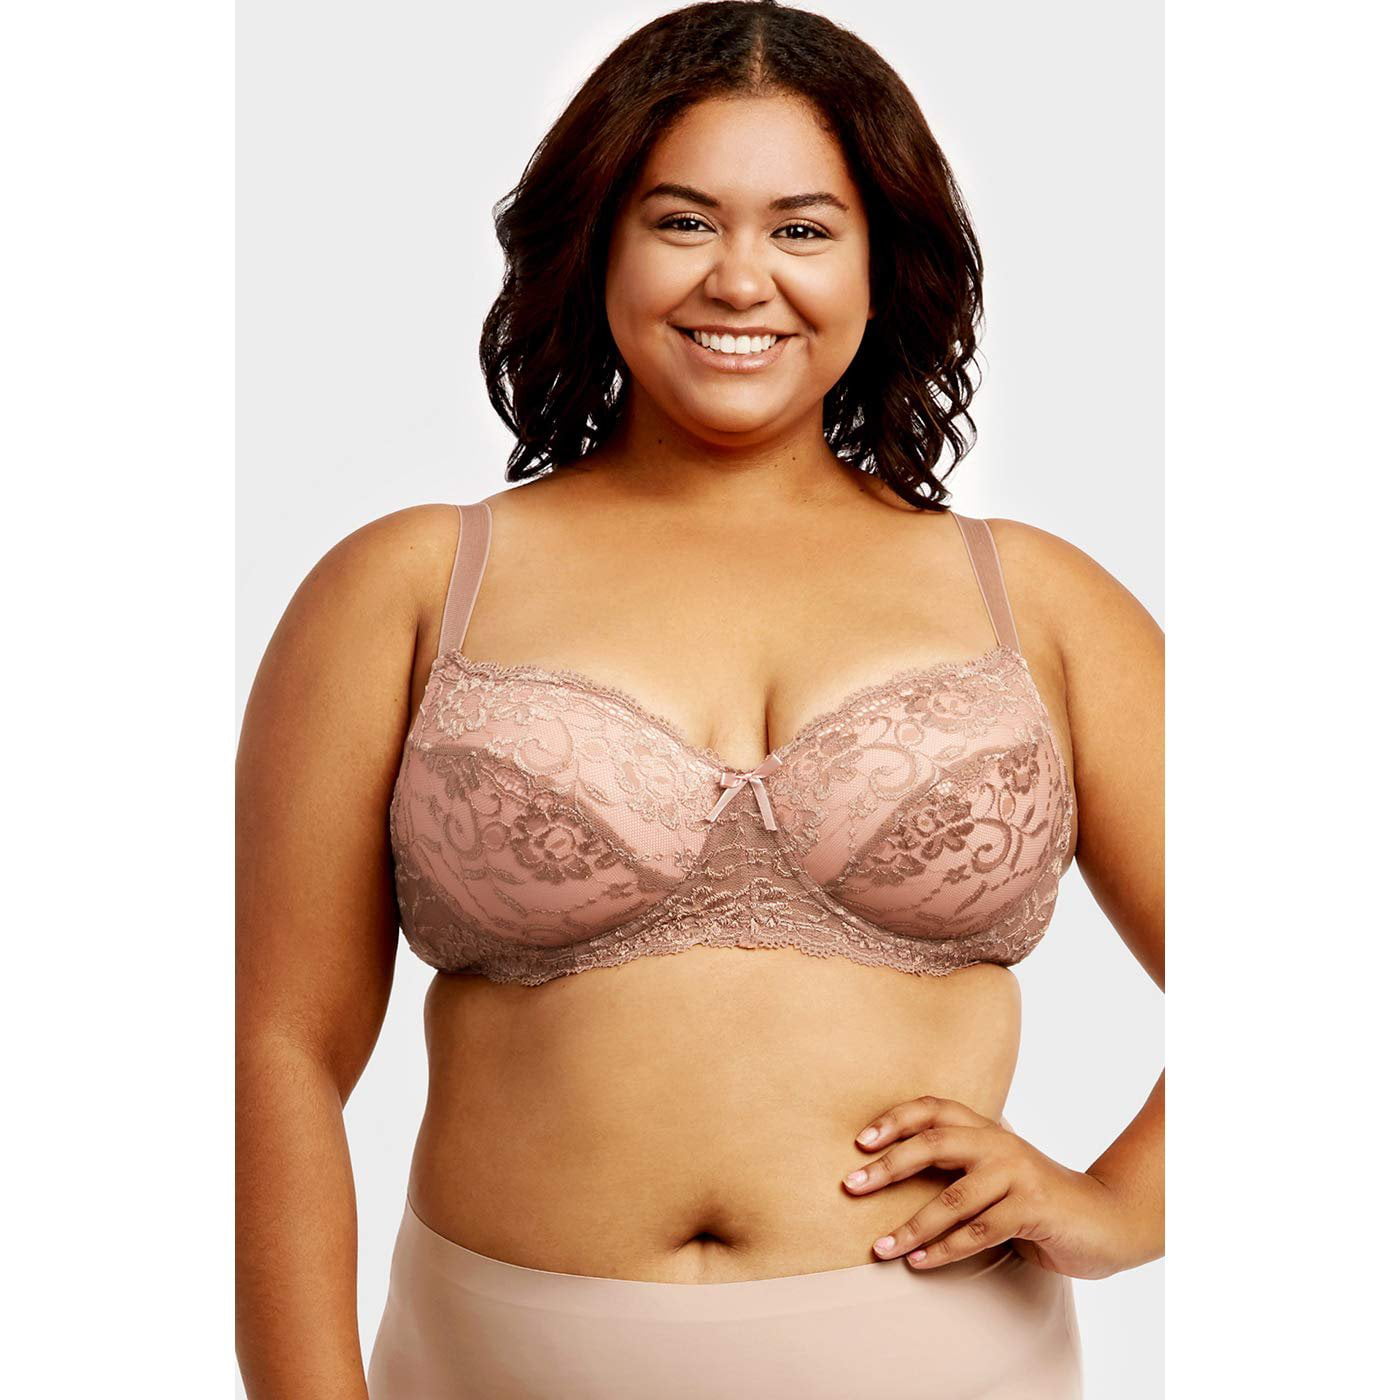 Women Bras 6 Pack of Bra D cup DD cup DDD cup Size 36D (F8203